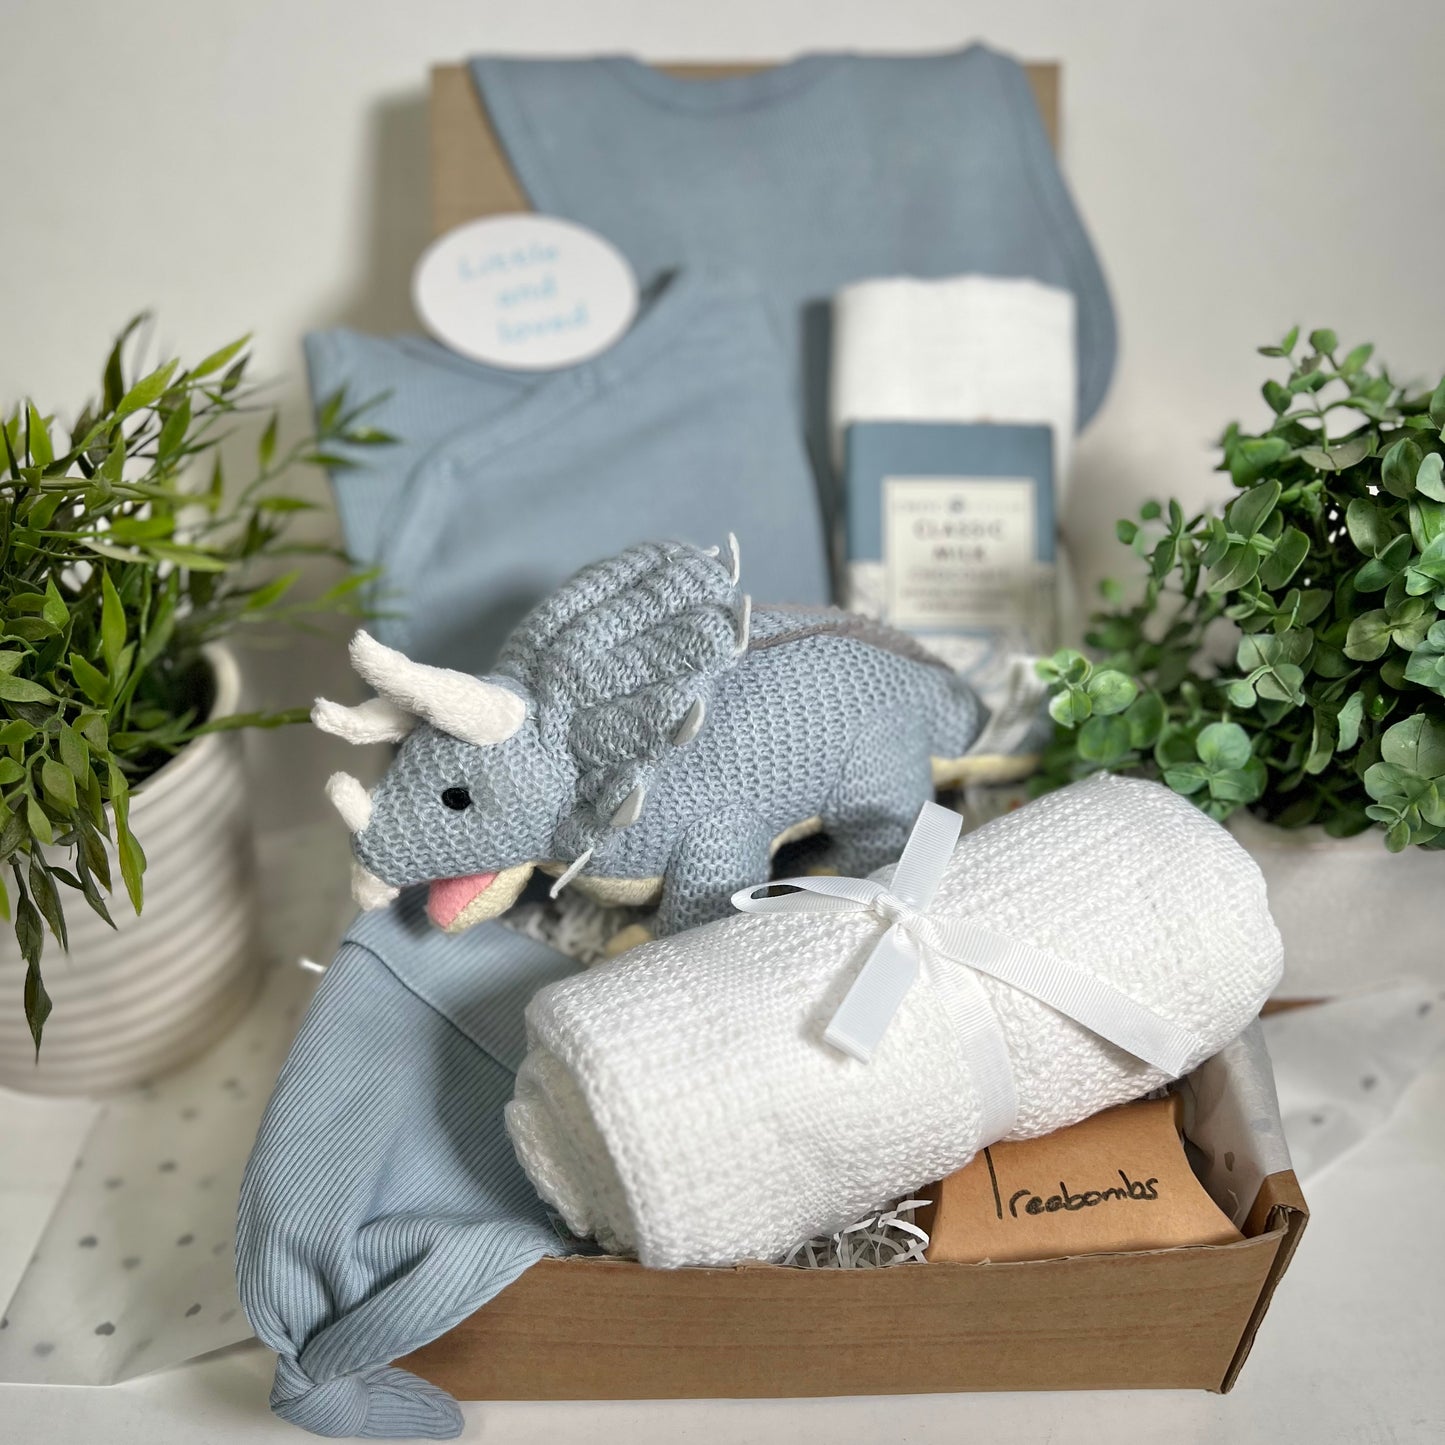 New baby boy gift comprising a blue knitted \triceroptops dinosaur soft toy, a white cotton cellular baby blanket, a white muslin square, a blue coton baby clothing set incluing a sleepsuit, dribble bib and bay knot hat, a Bar of Choc Affair milk chocolate a smapp reveresible baby photography disc and a pack of Treebombs.